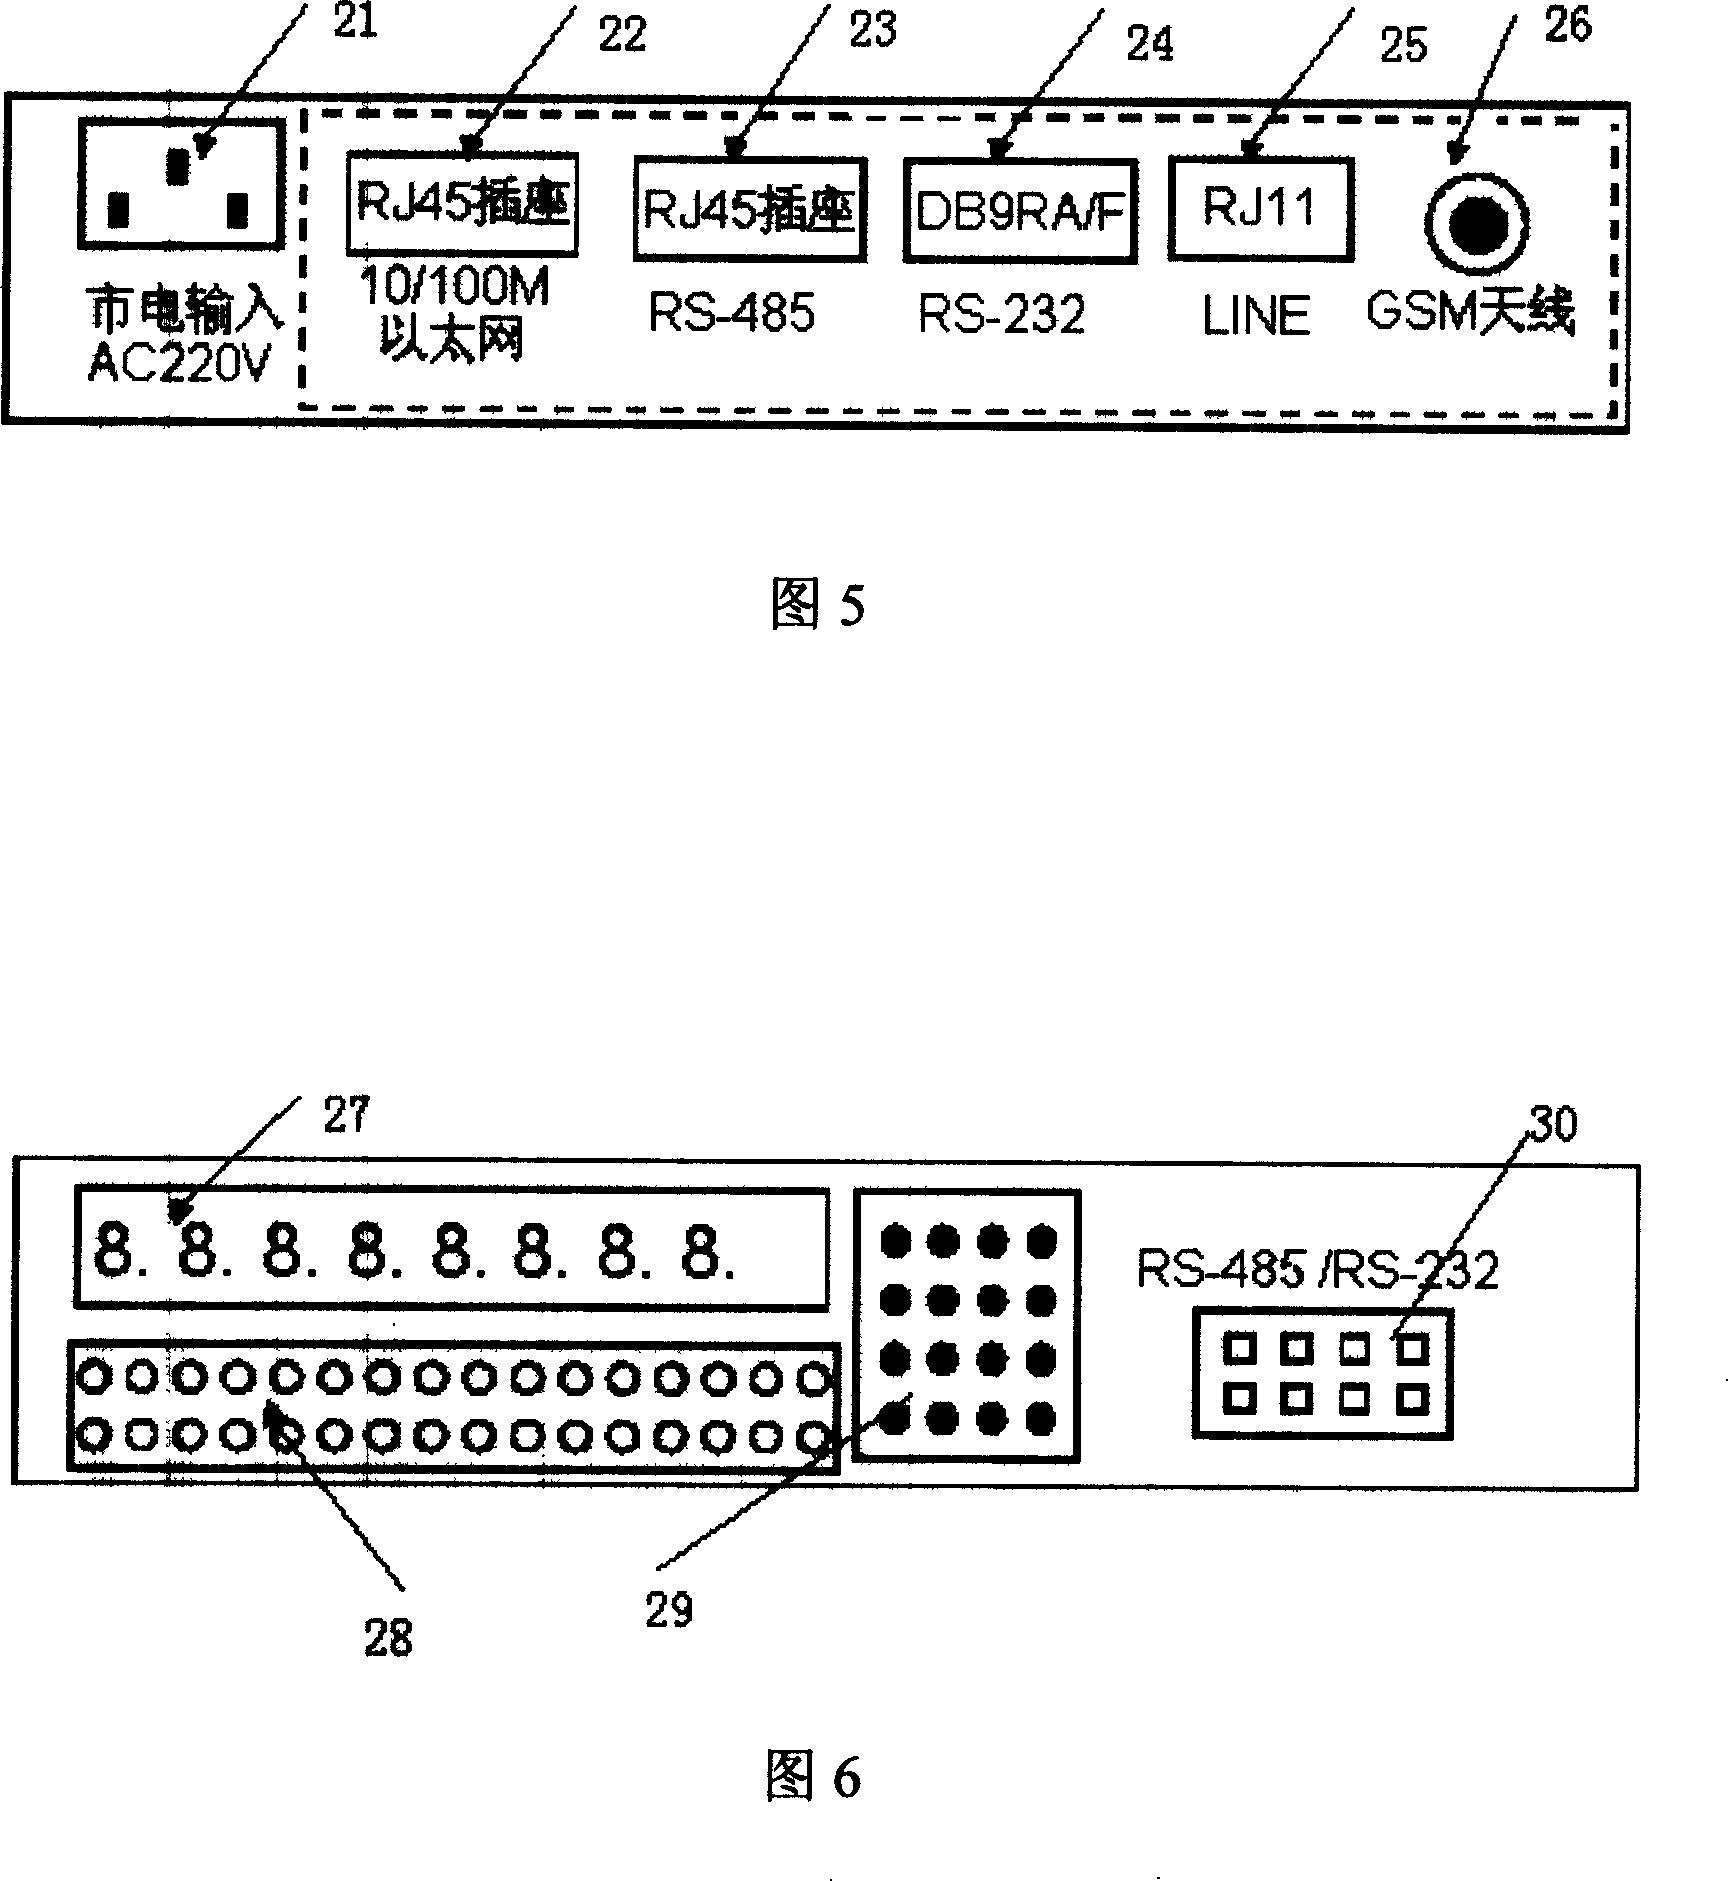 Collecting and controlling device for date of environmental protection with multiple network interface based on two-level architecture